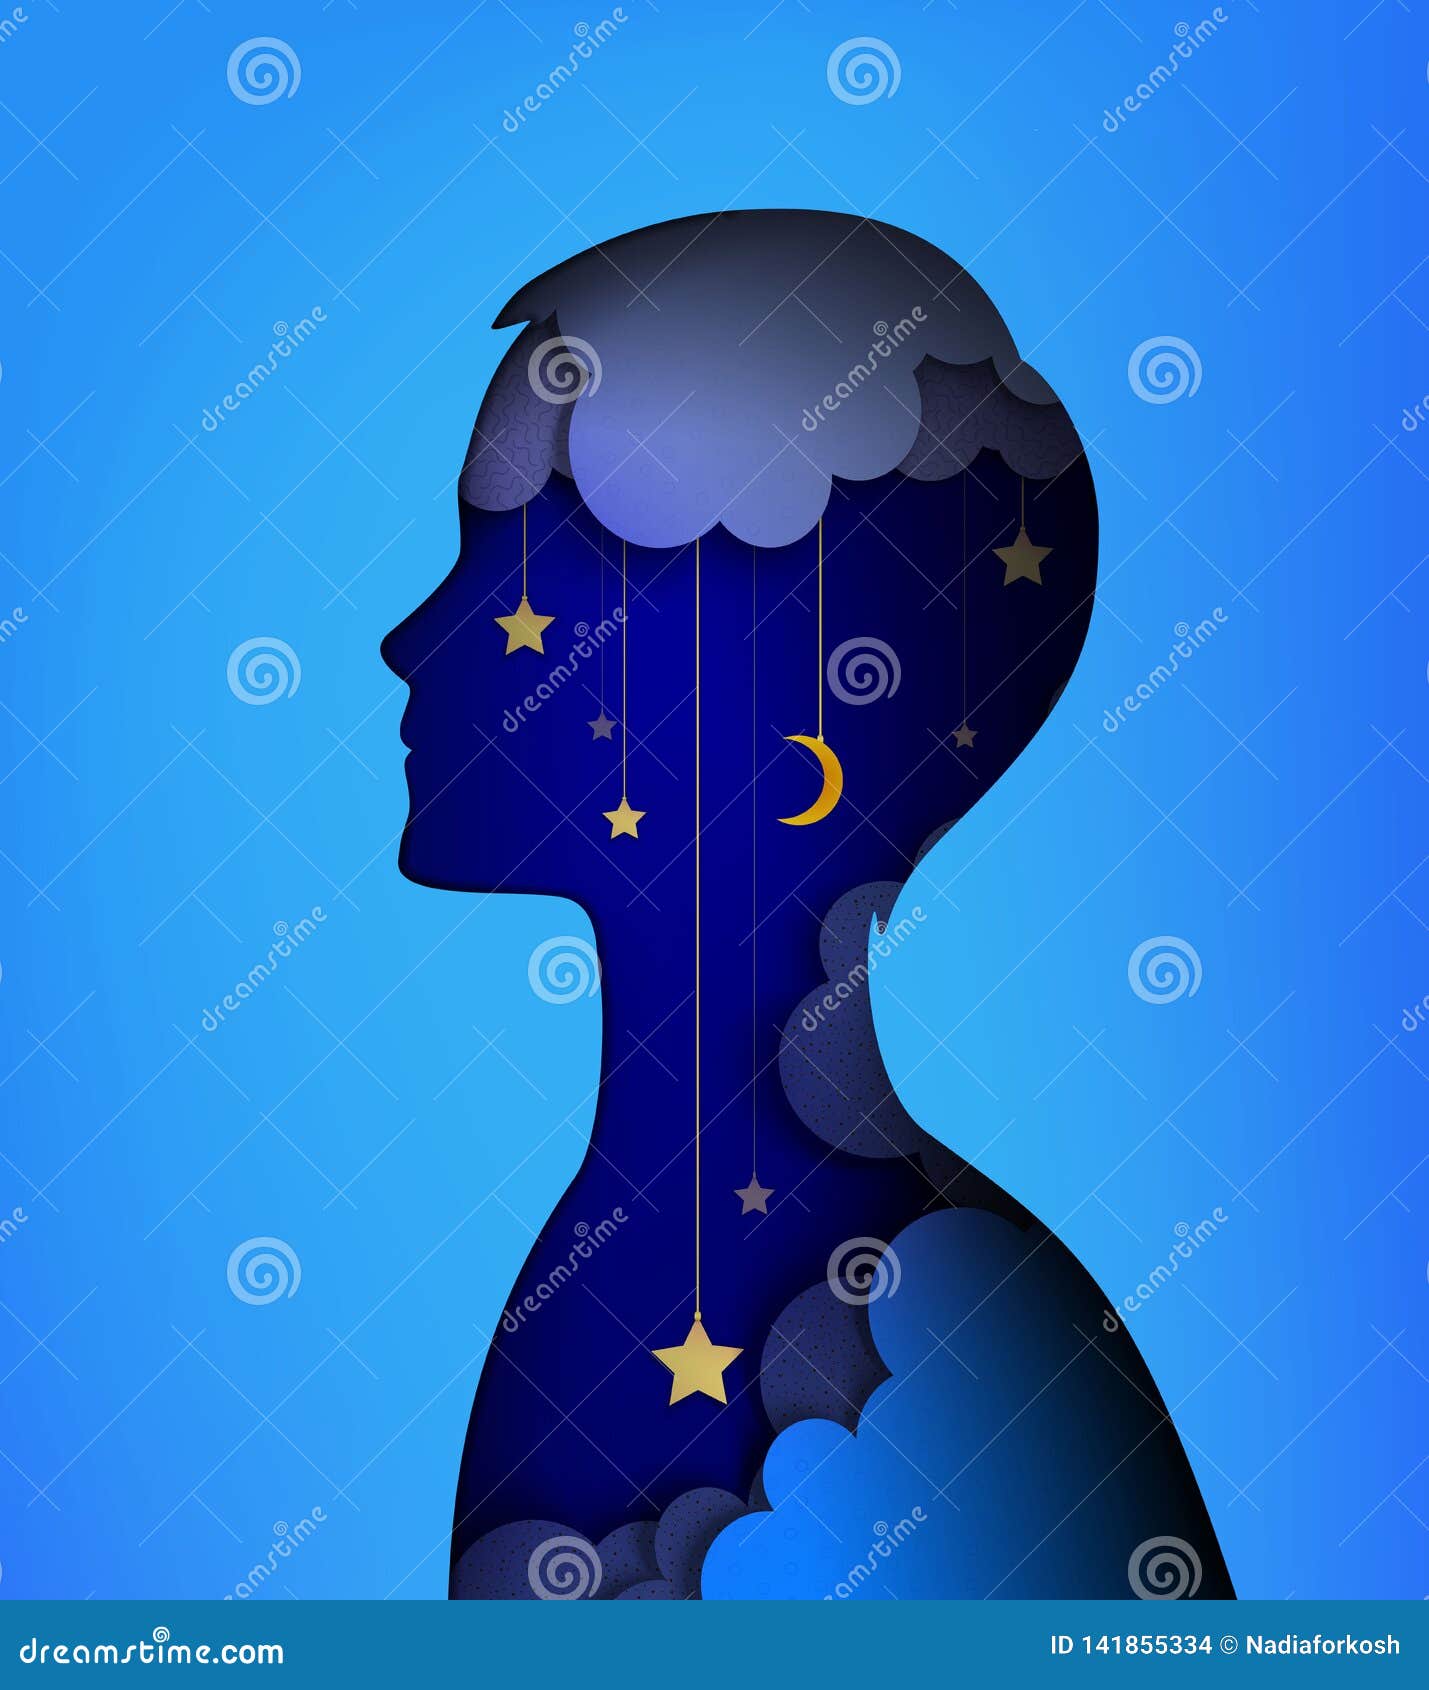 dreamer concept, layers picture, young boy silhouette with night sky inside, night dream idea,